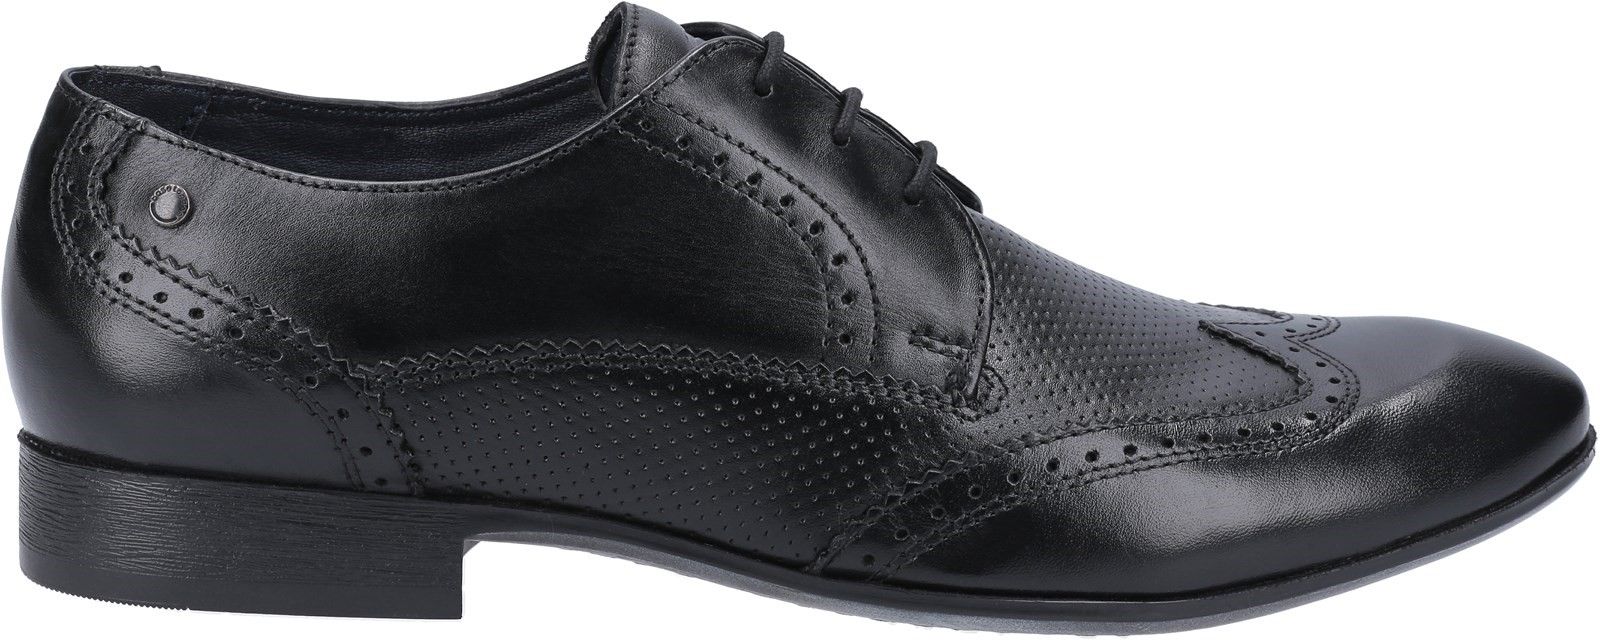 Whether you're looking for workwear or special occasion wear, the Philby brogue will have you covered. Its traditional and simple design makes it suitable for a variety of occasions, making it a staple in any man's footlocker. Wing-tip. 
3-lace brogue. 
No-fuss design. 
Subtle brogue & stitching detail. 
Elegant resin sole.